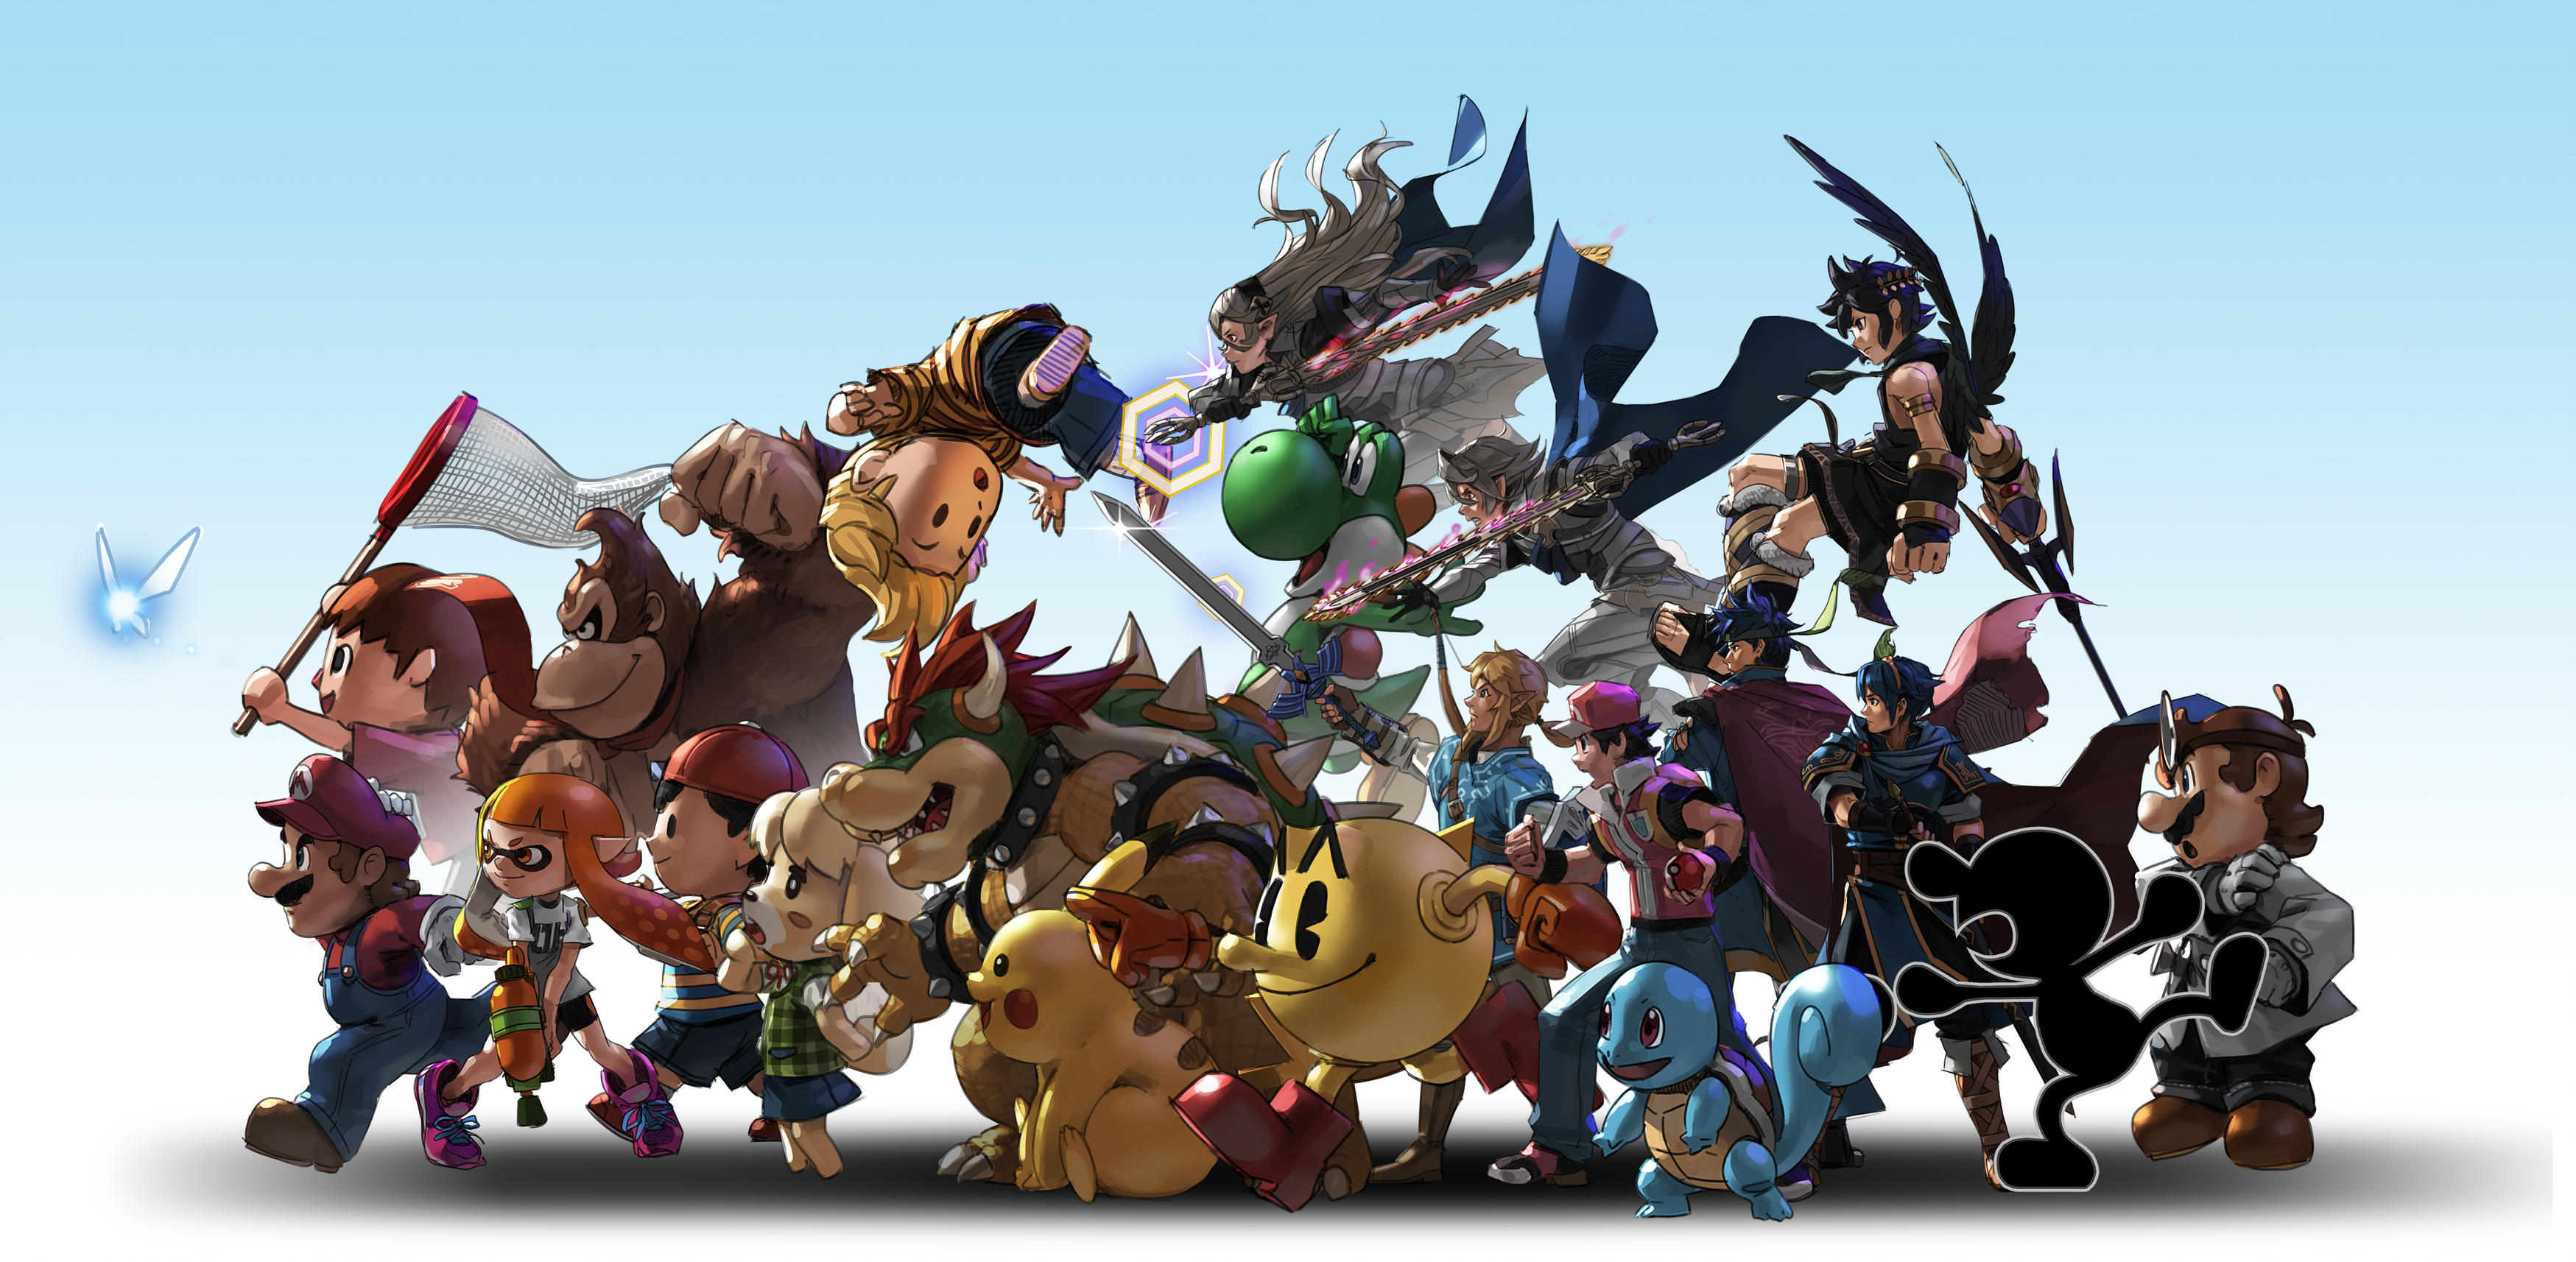 Super Smash Bros Ultimate wallpapers for desktop download free Super Smash  Bros Ultimate pictures and backgrounds for PC  moborg